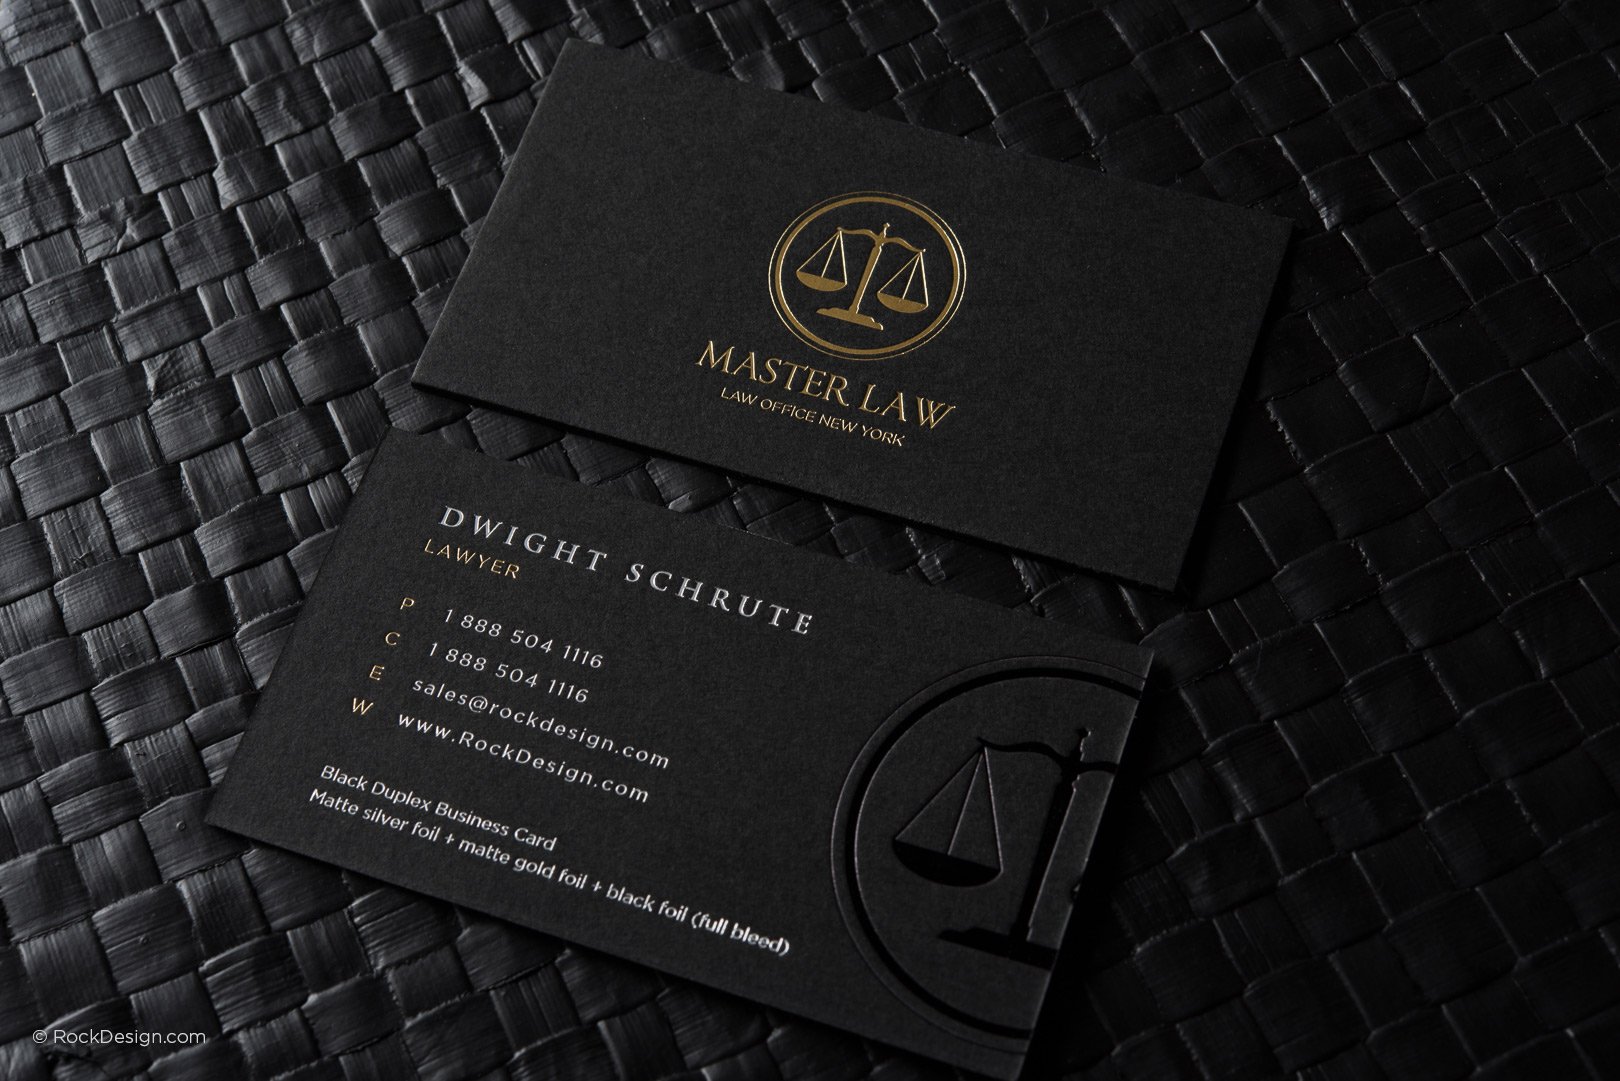 FREE Lawyer business card template  RockDesign.com Intended For Legal Business Cards Templates Free